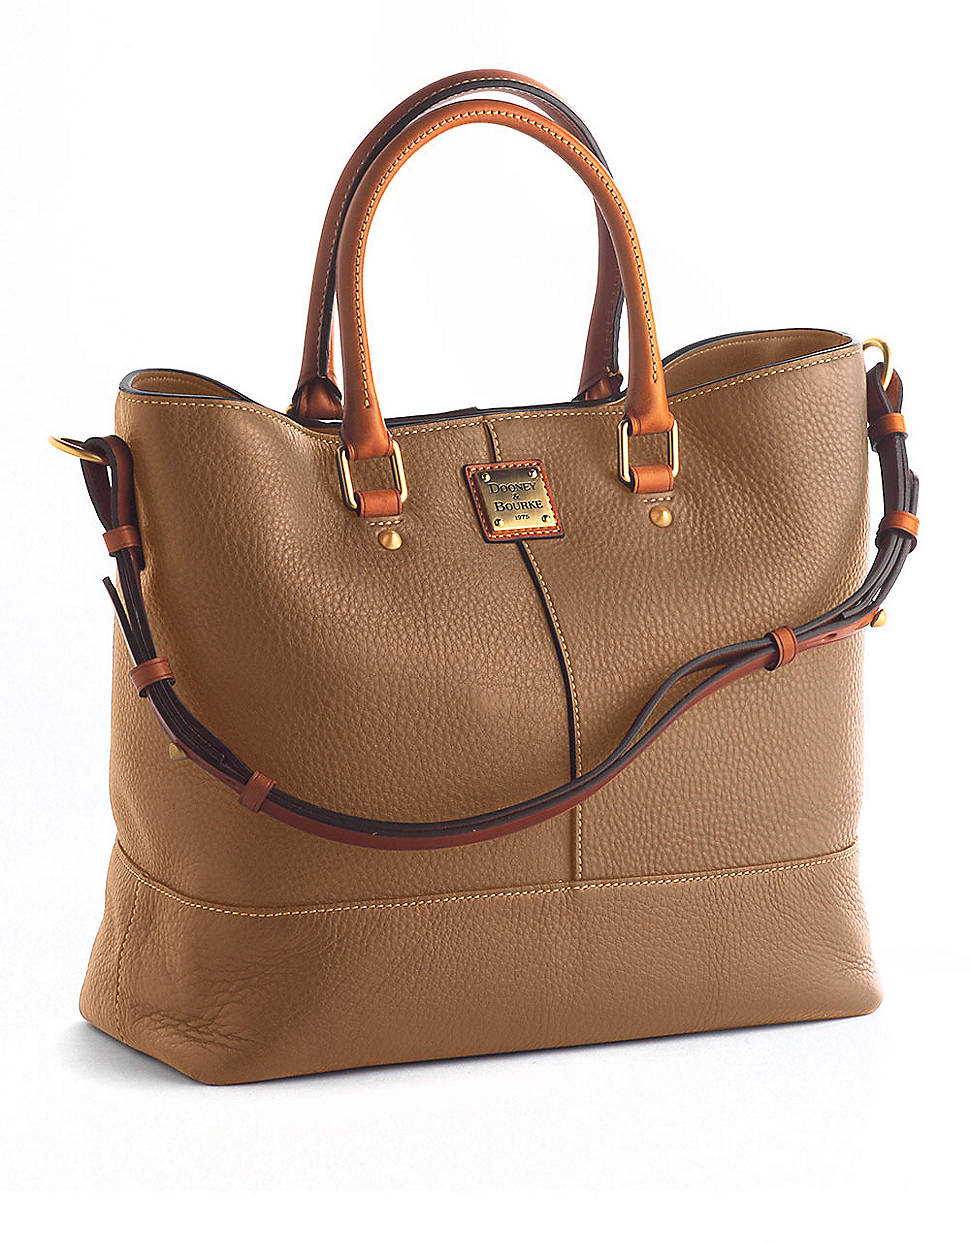 Dooney & Bourke Dillen Chelsea Leather Shopper Tote Bag in Brown (TAUPE ...